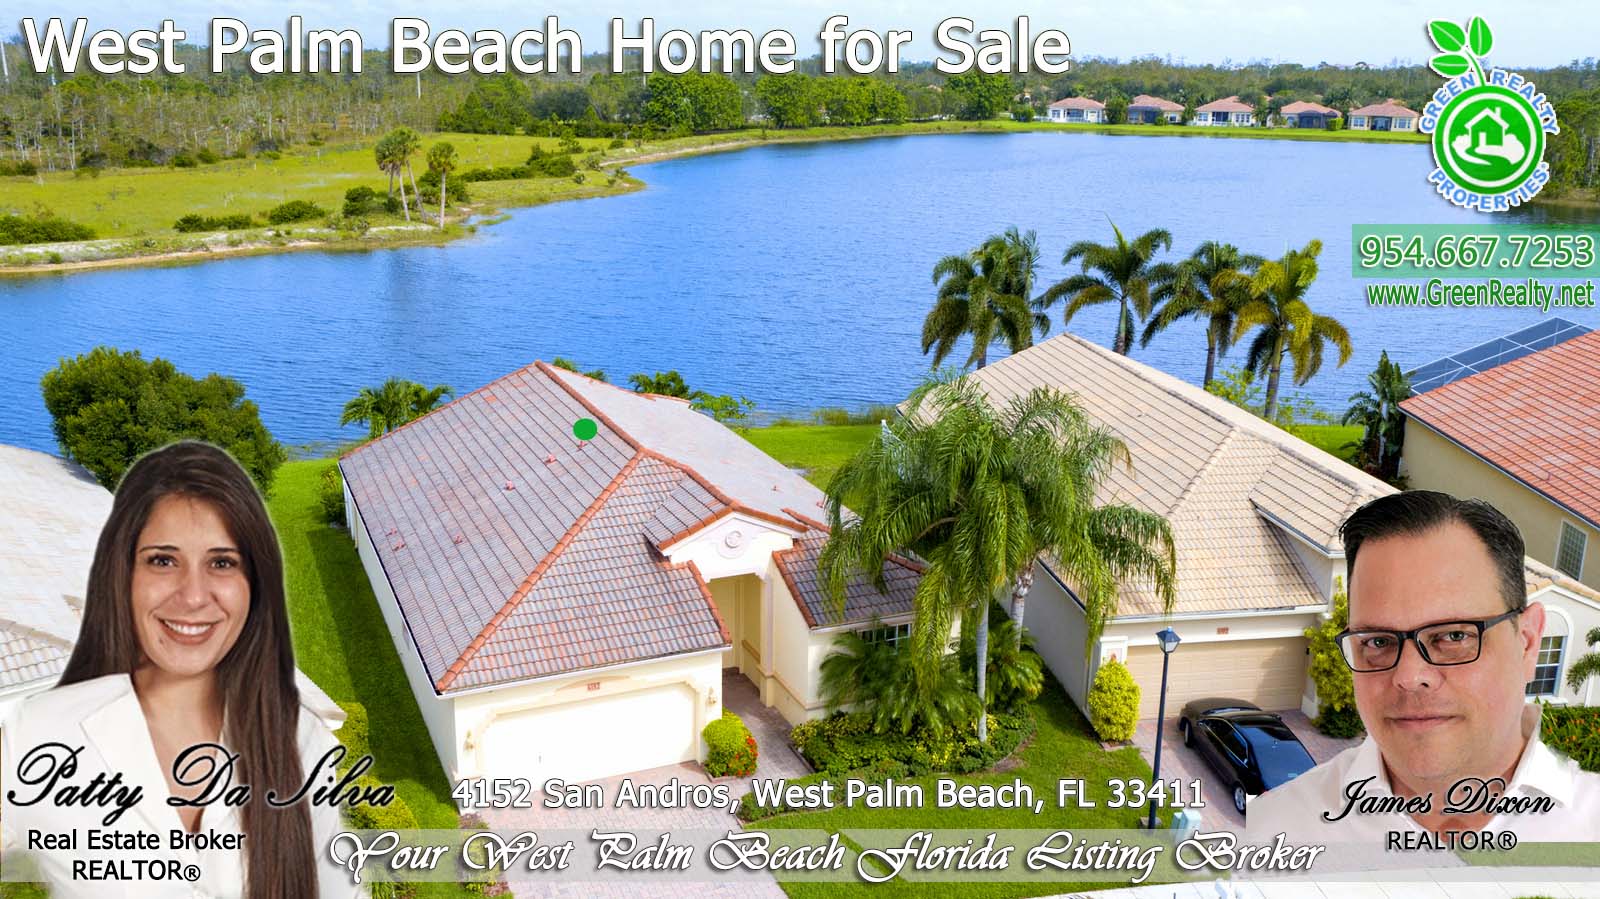 West Palm Beach Homes For Sale - 4152 San Andros Aerial Photos (6)